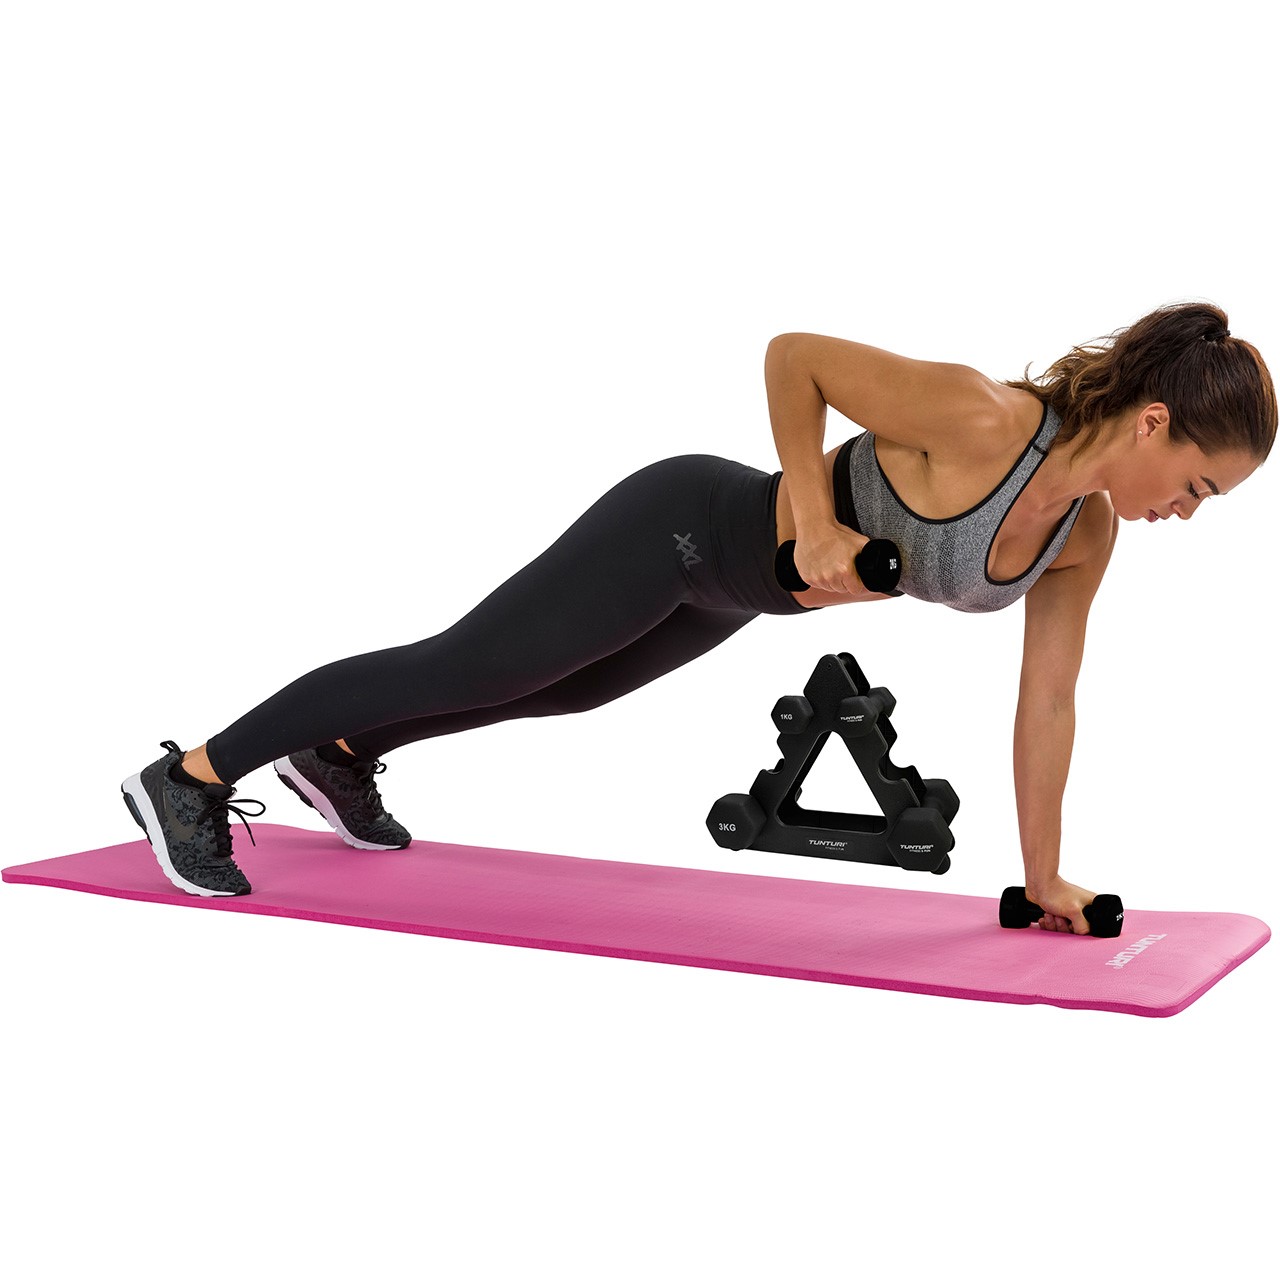 Neoprene Dumbbells Set with Stand from Tunturi